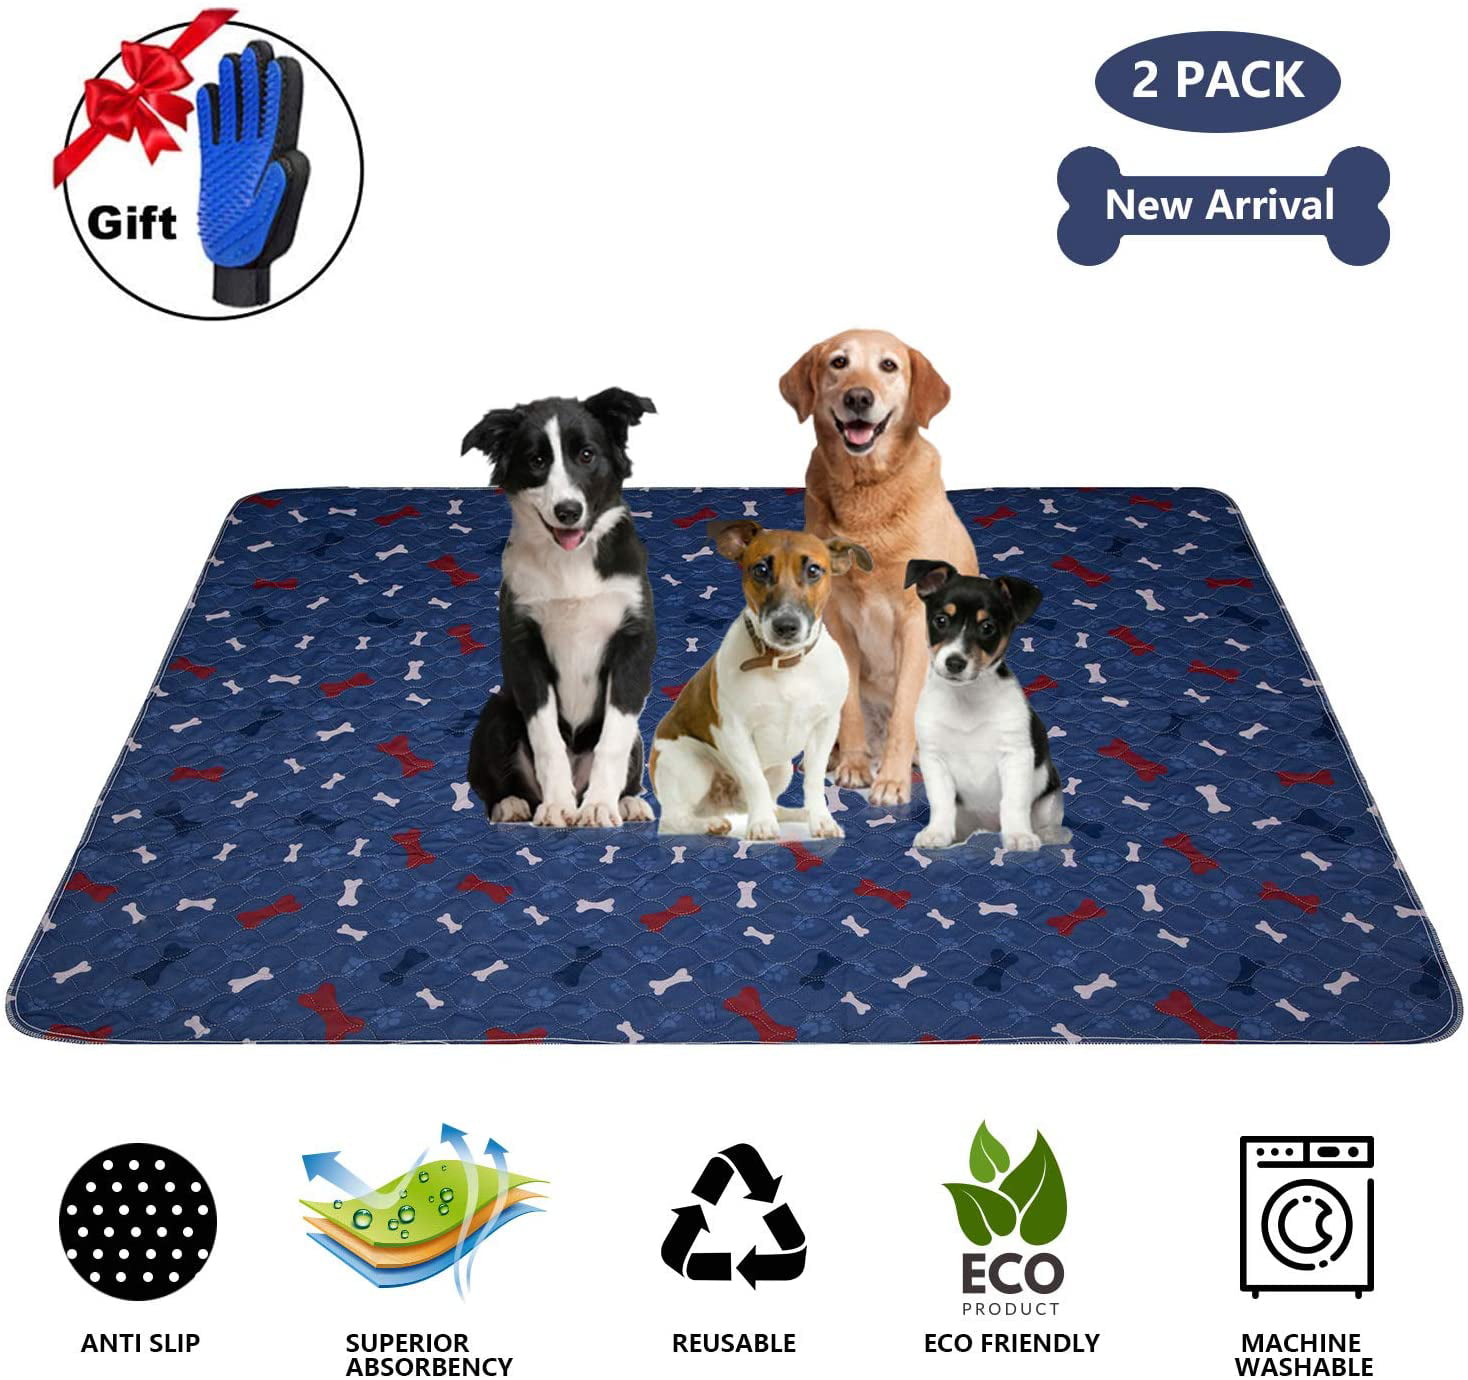 KOOLTAIL Washable Pee Pads for Dogs Reusable Whelping Pads Blue & Red Waterproof Dog Mat Non-Slip Plaid Puppy Potty Training Pads 